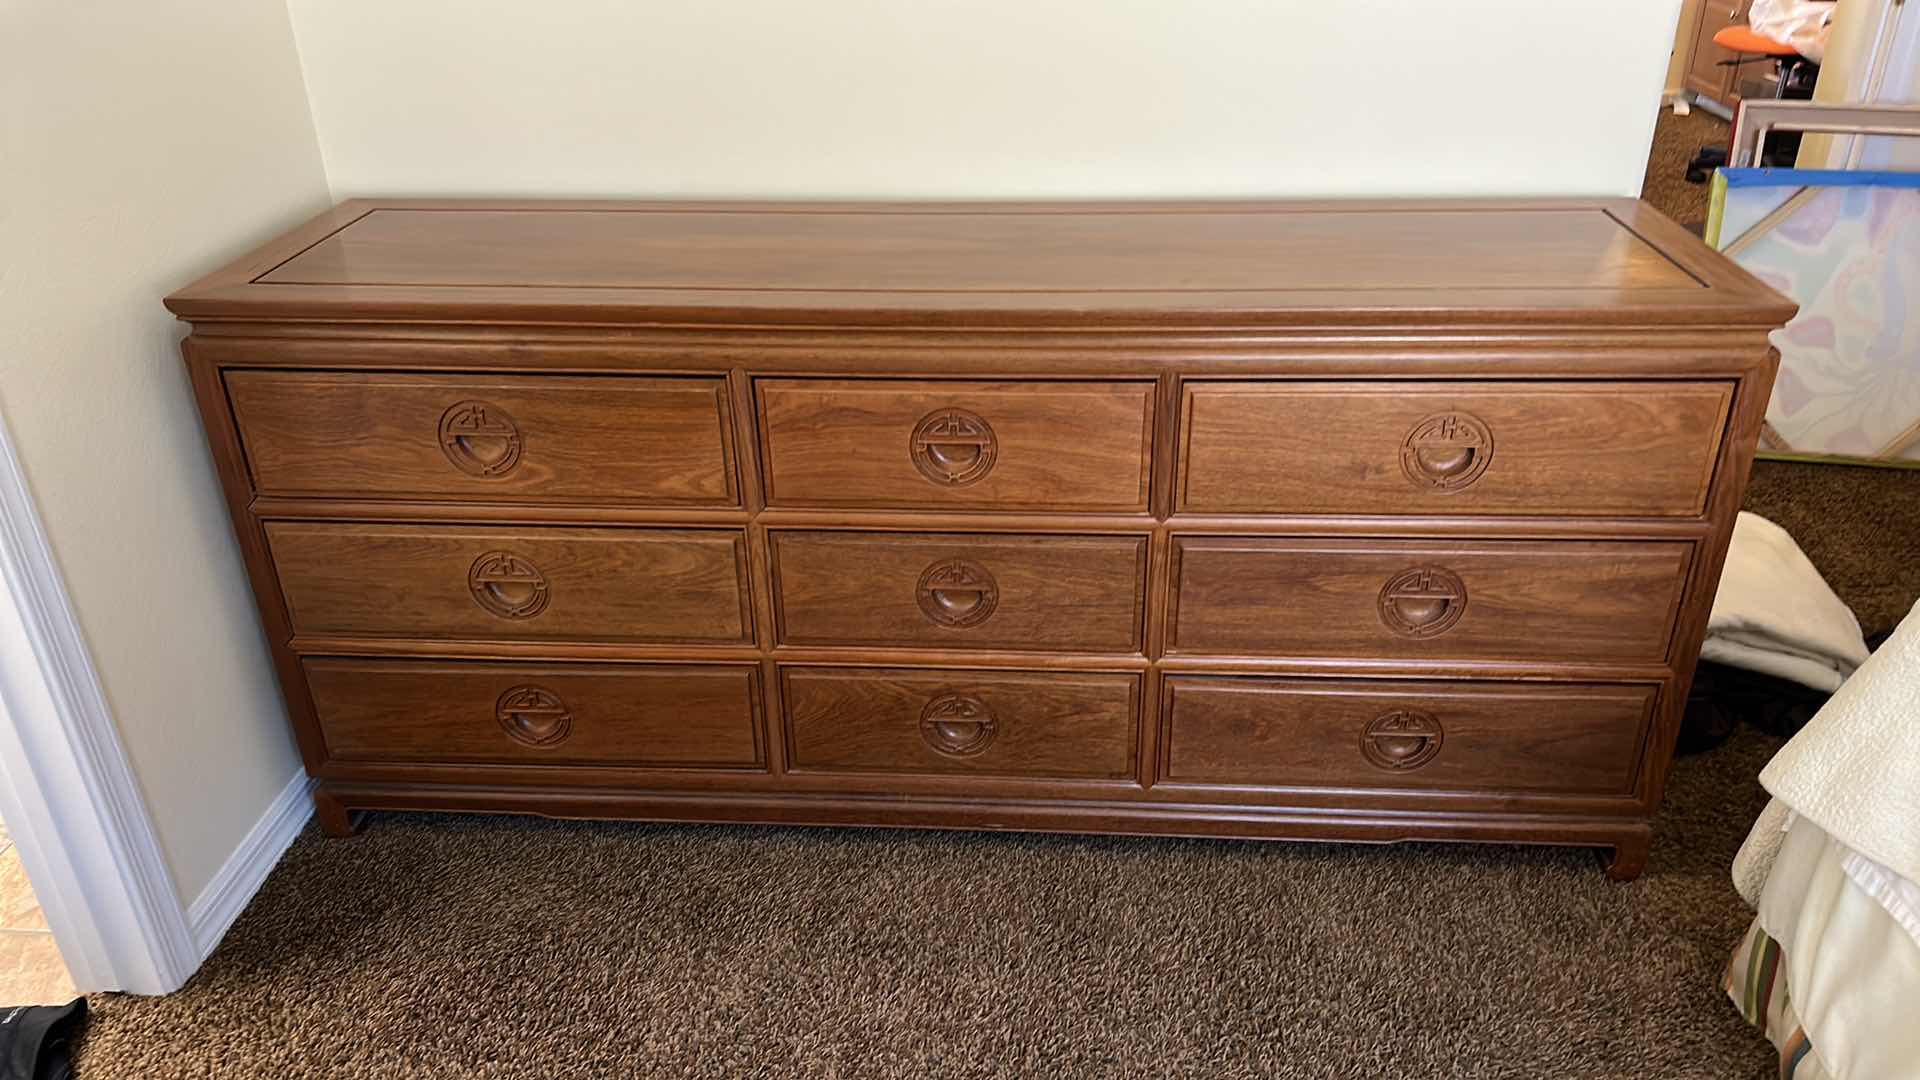 Photo 5 of ASIAN INSPIRED WOOD 9 DRAWER DRESSER 6’ x 19” x 31 1/2”